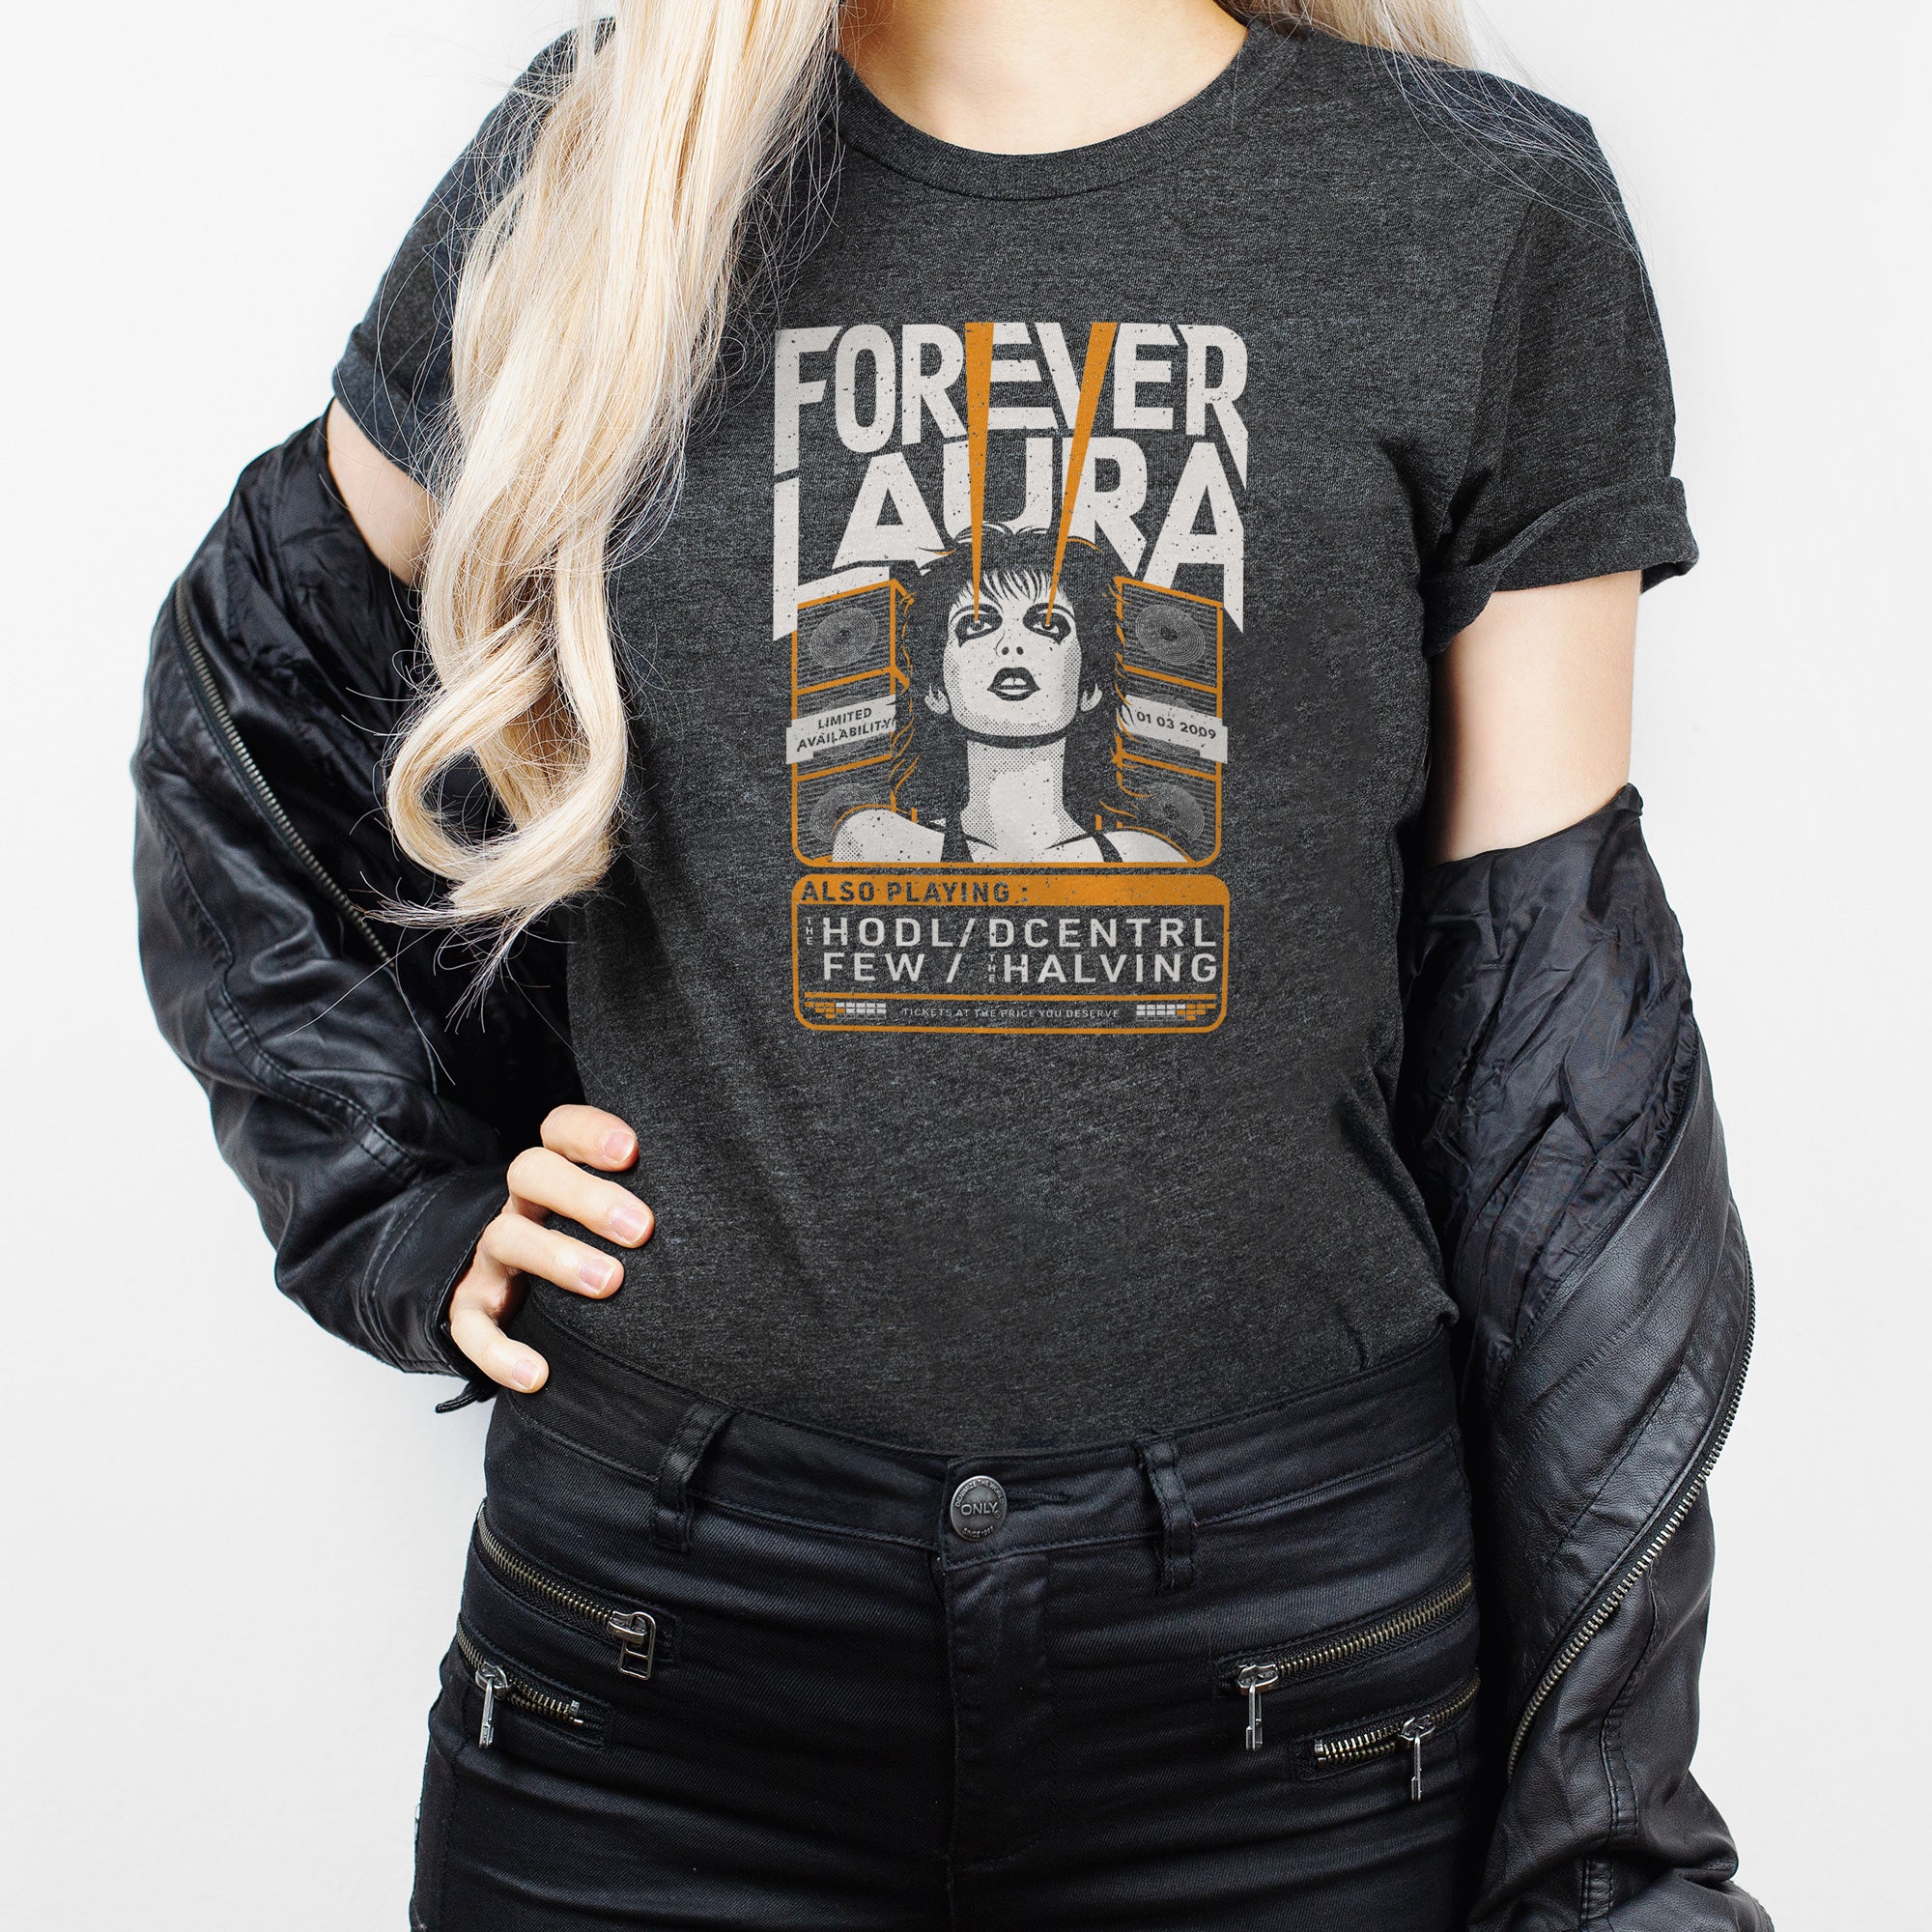 Forever Laura Band T-Shirt